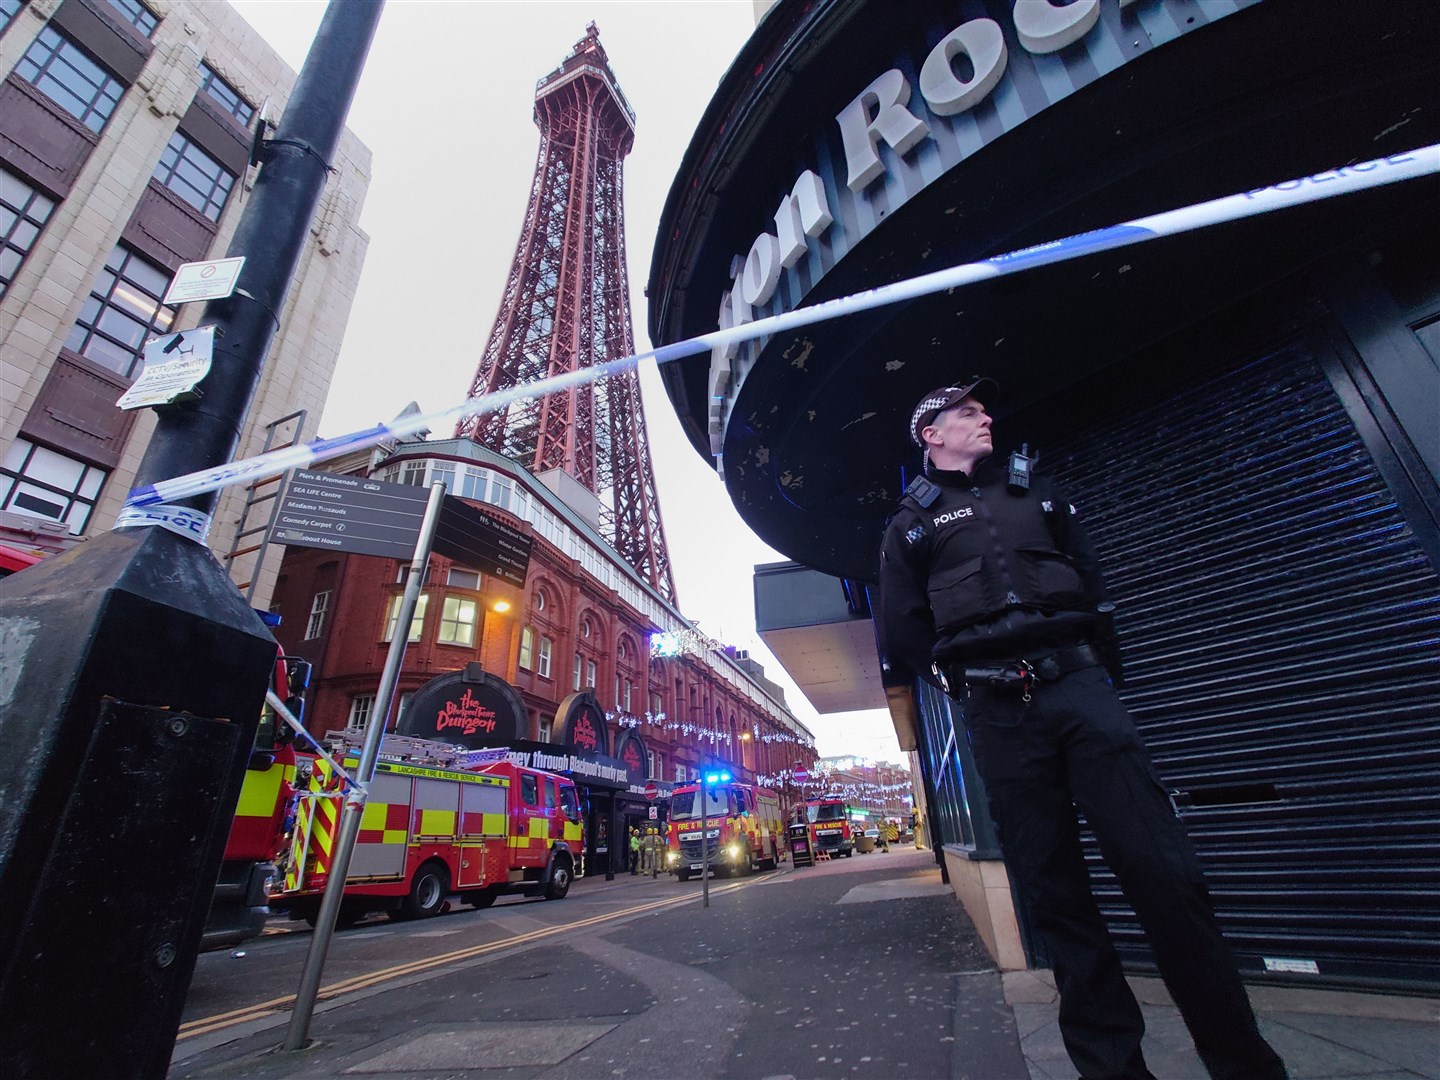 The police and fire service confirmed there was no blaze at the top of the tower (Michael Holmes/PA)